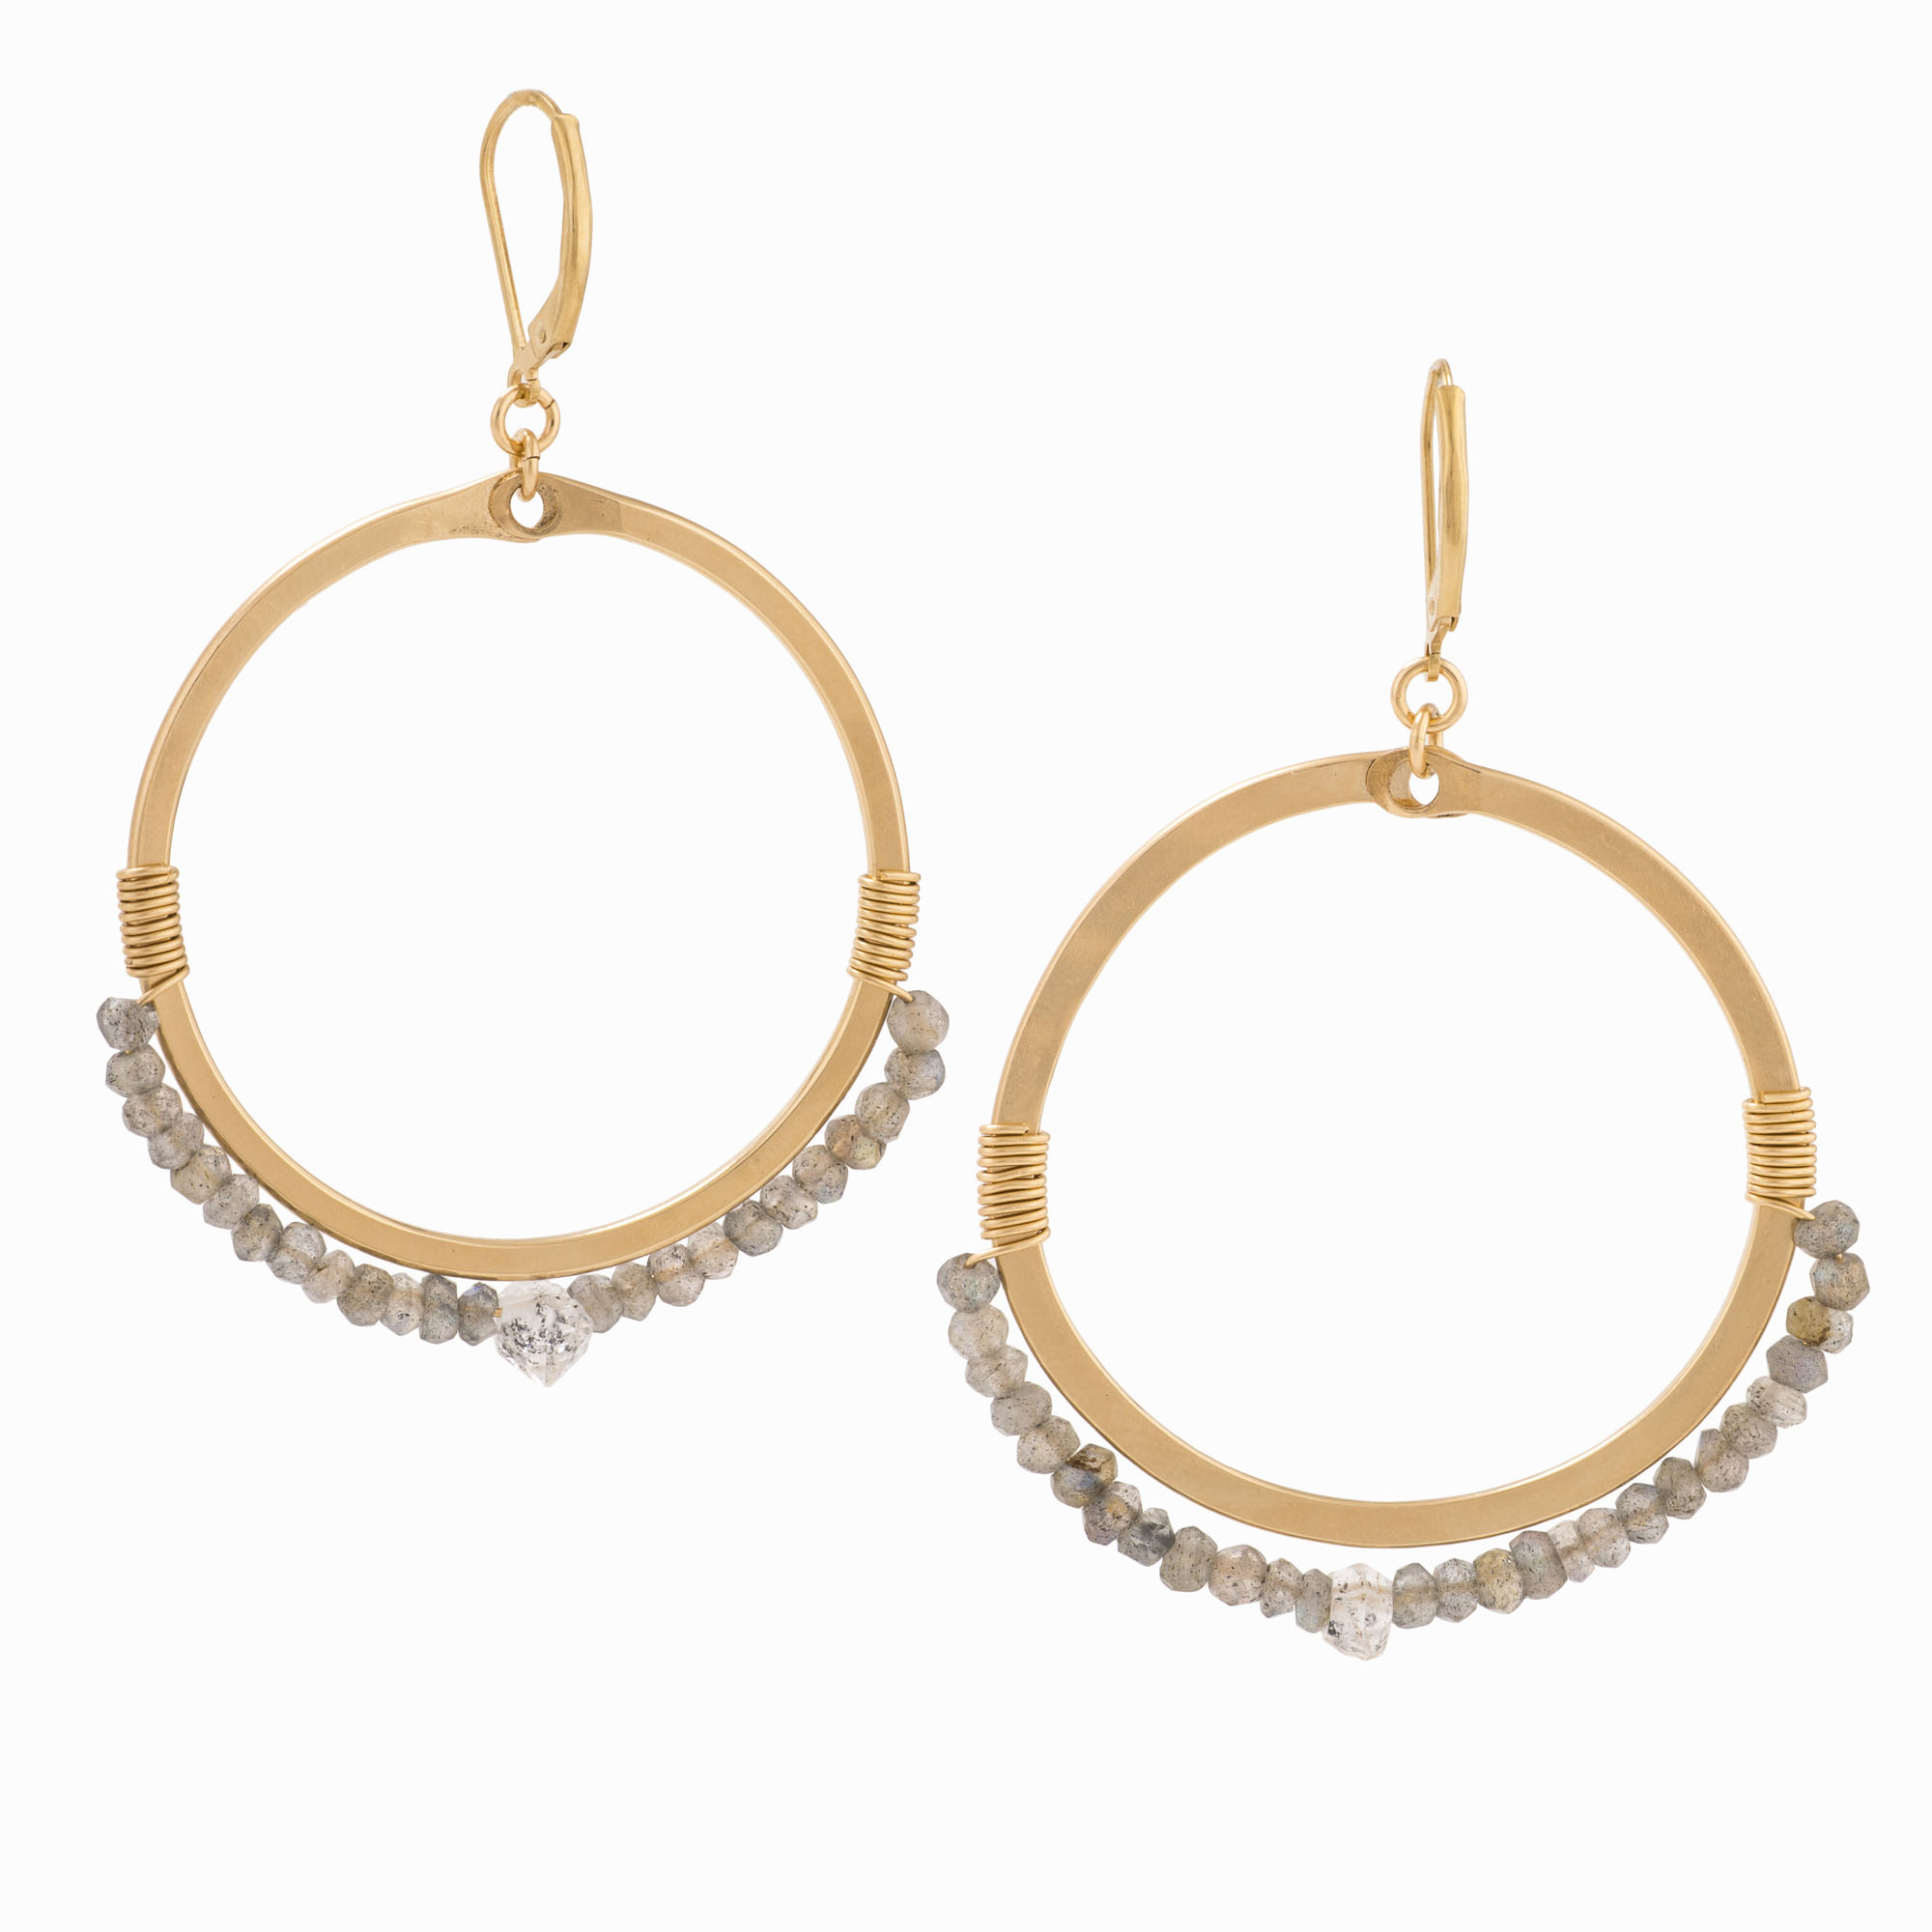 Featured image for “Volara Gold Hoop Earrings”